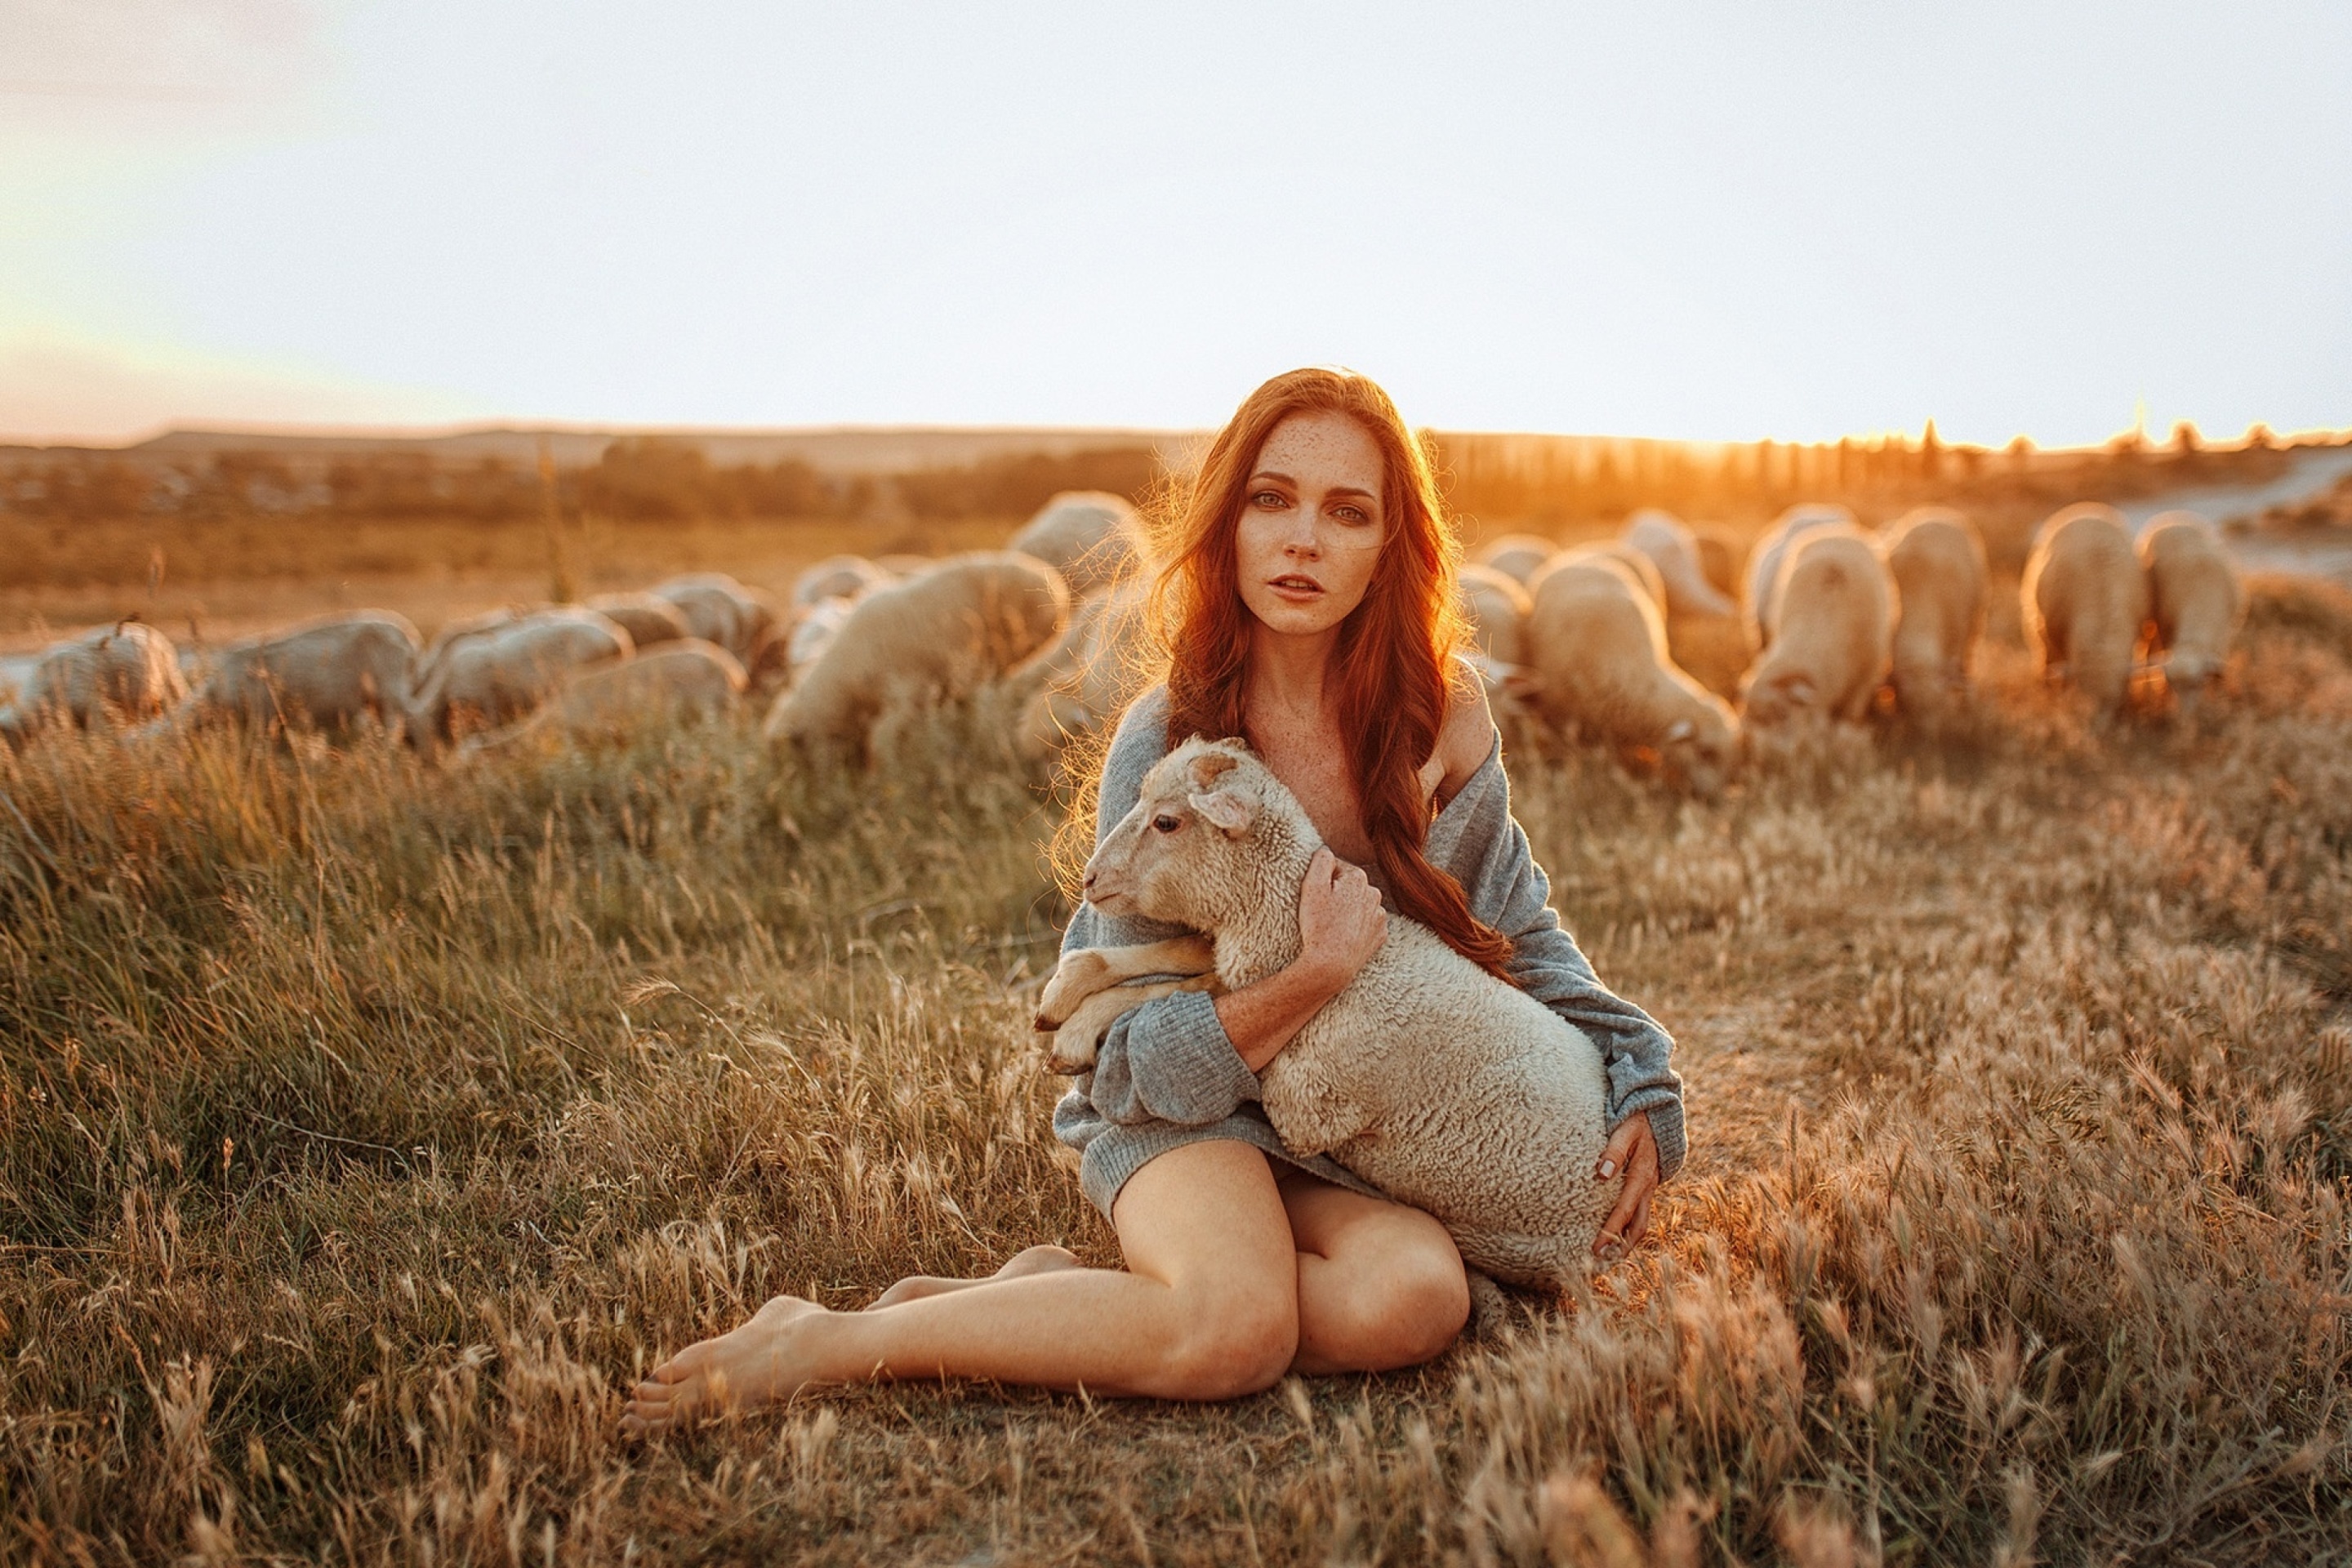 Girl with Sheep wallpaper 2880x1920